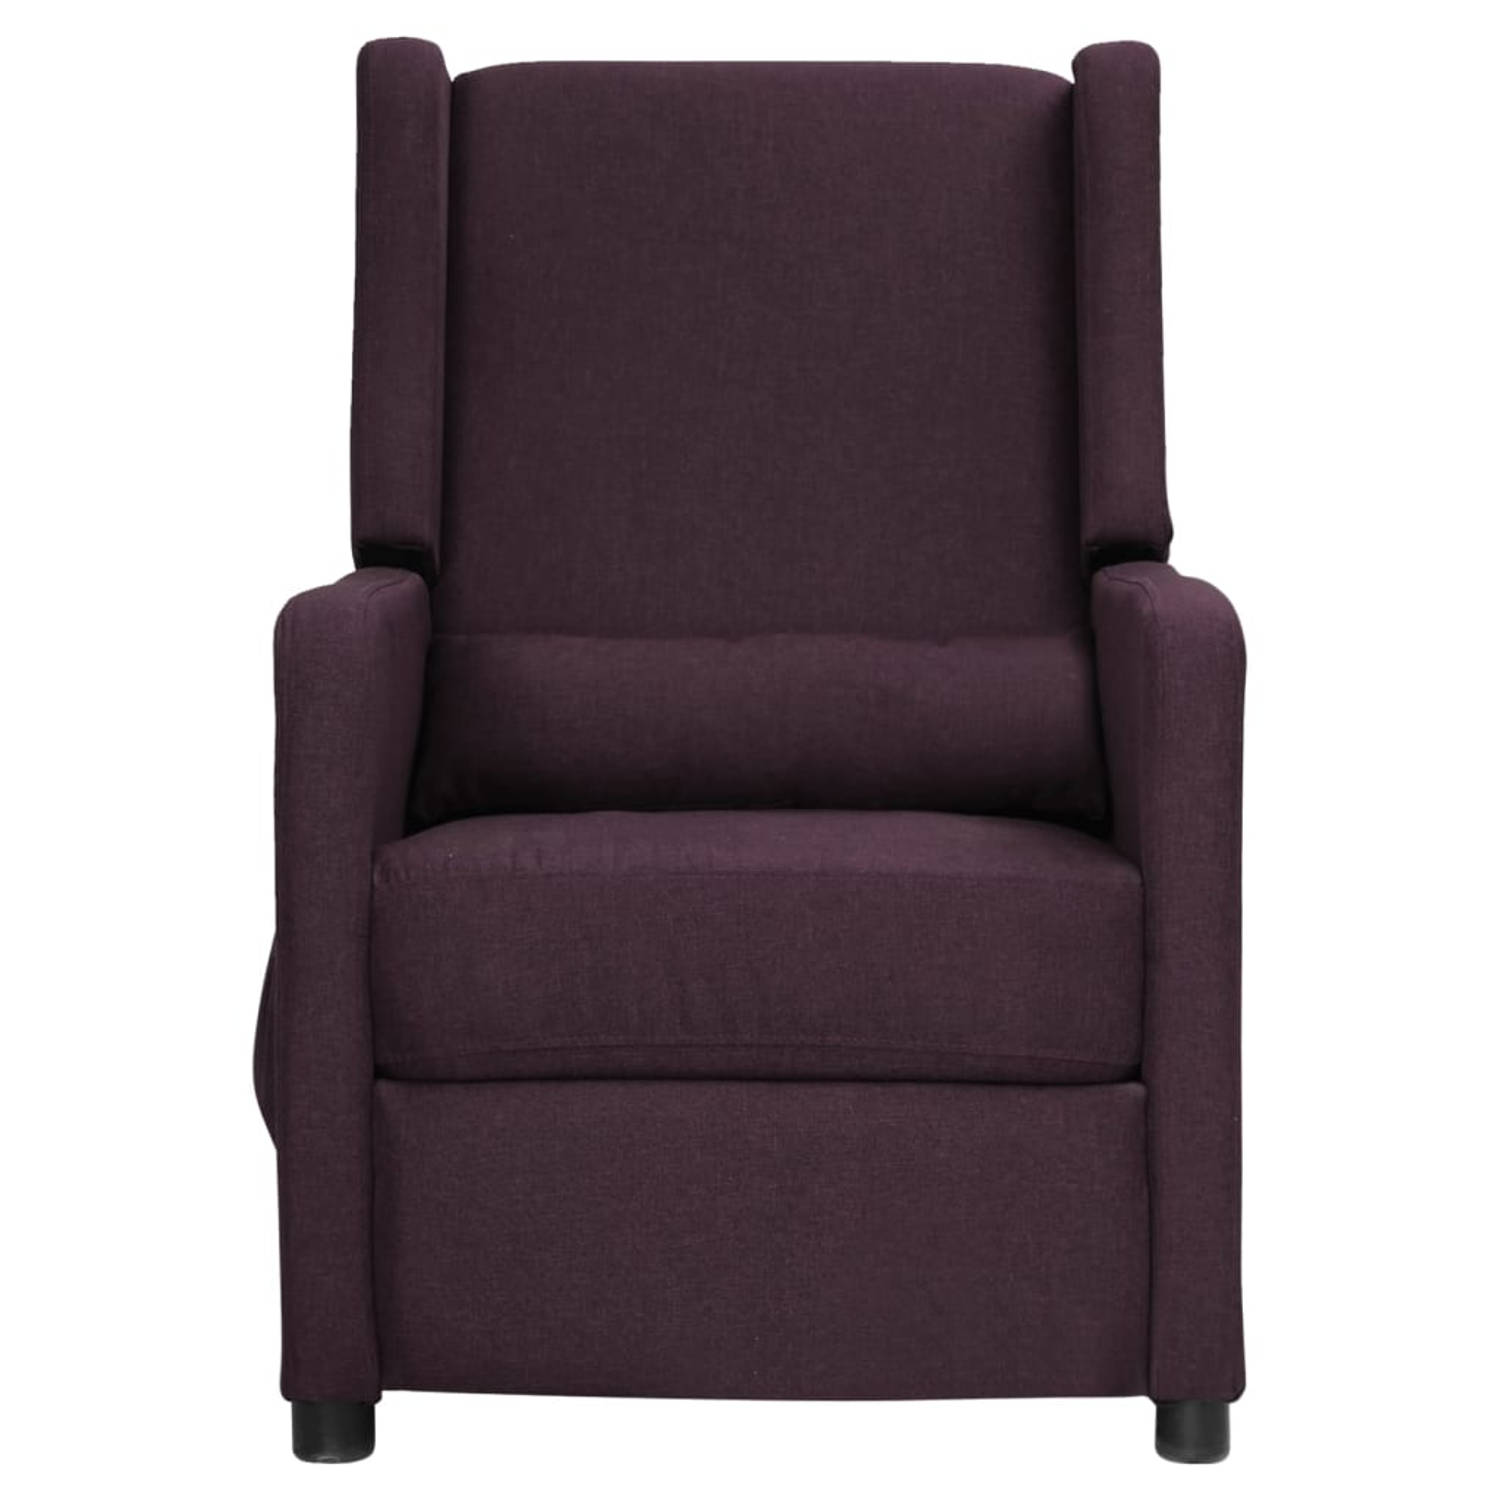 The Living Store Massagestoel stof paars - Fauteuil